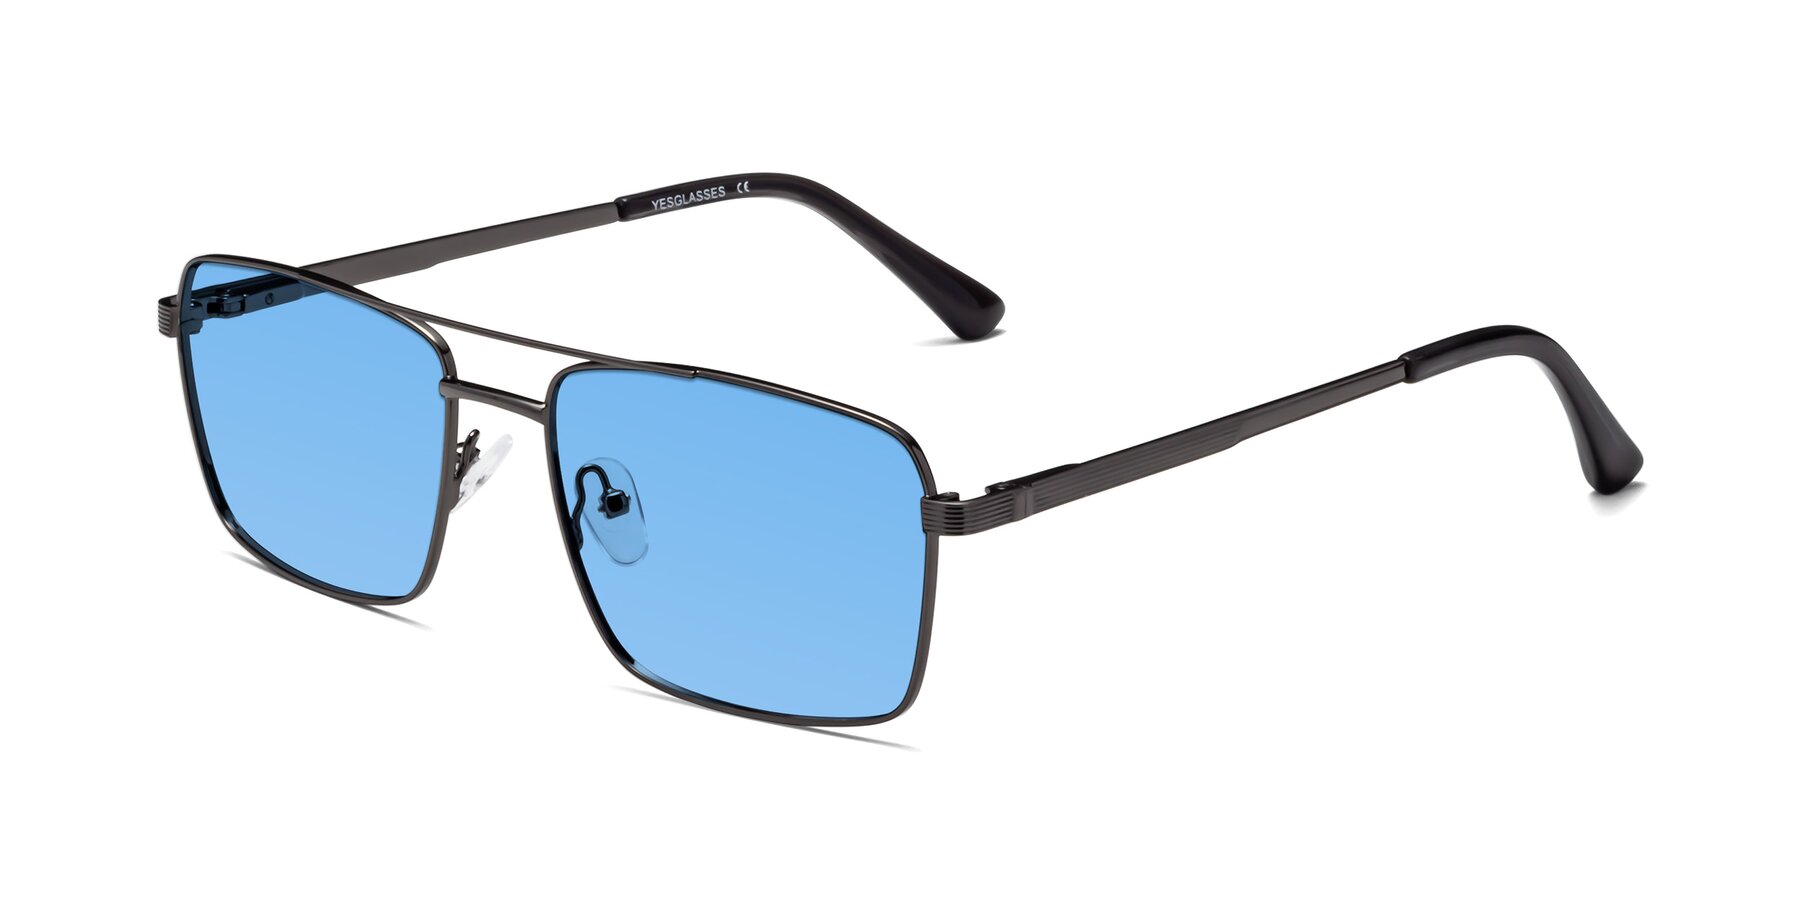 Angle of Beckum in Gunmetal with Medium Blue Tinted Lenses